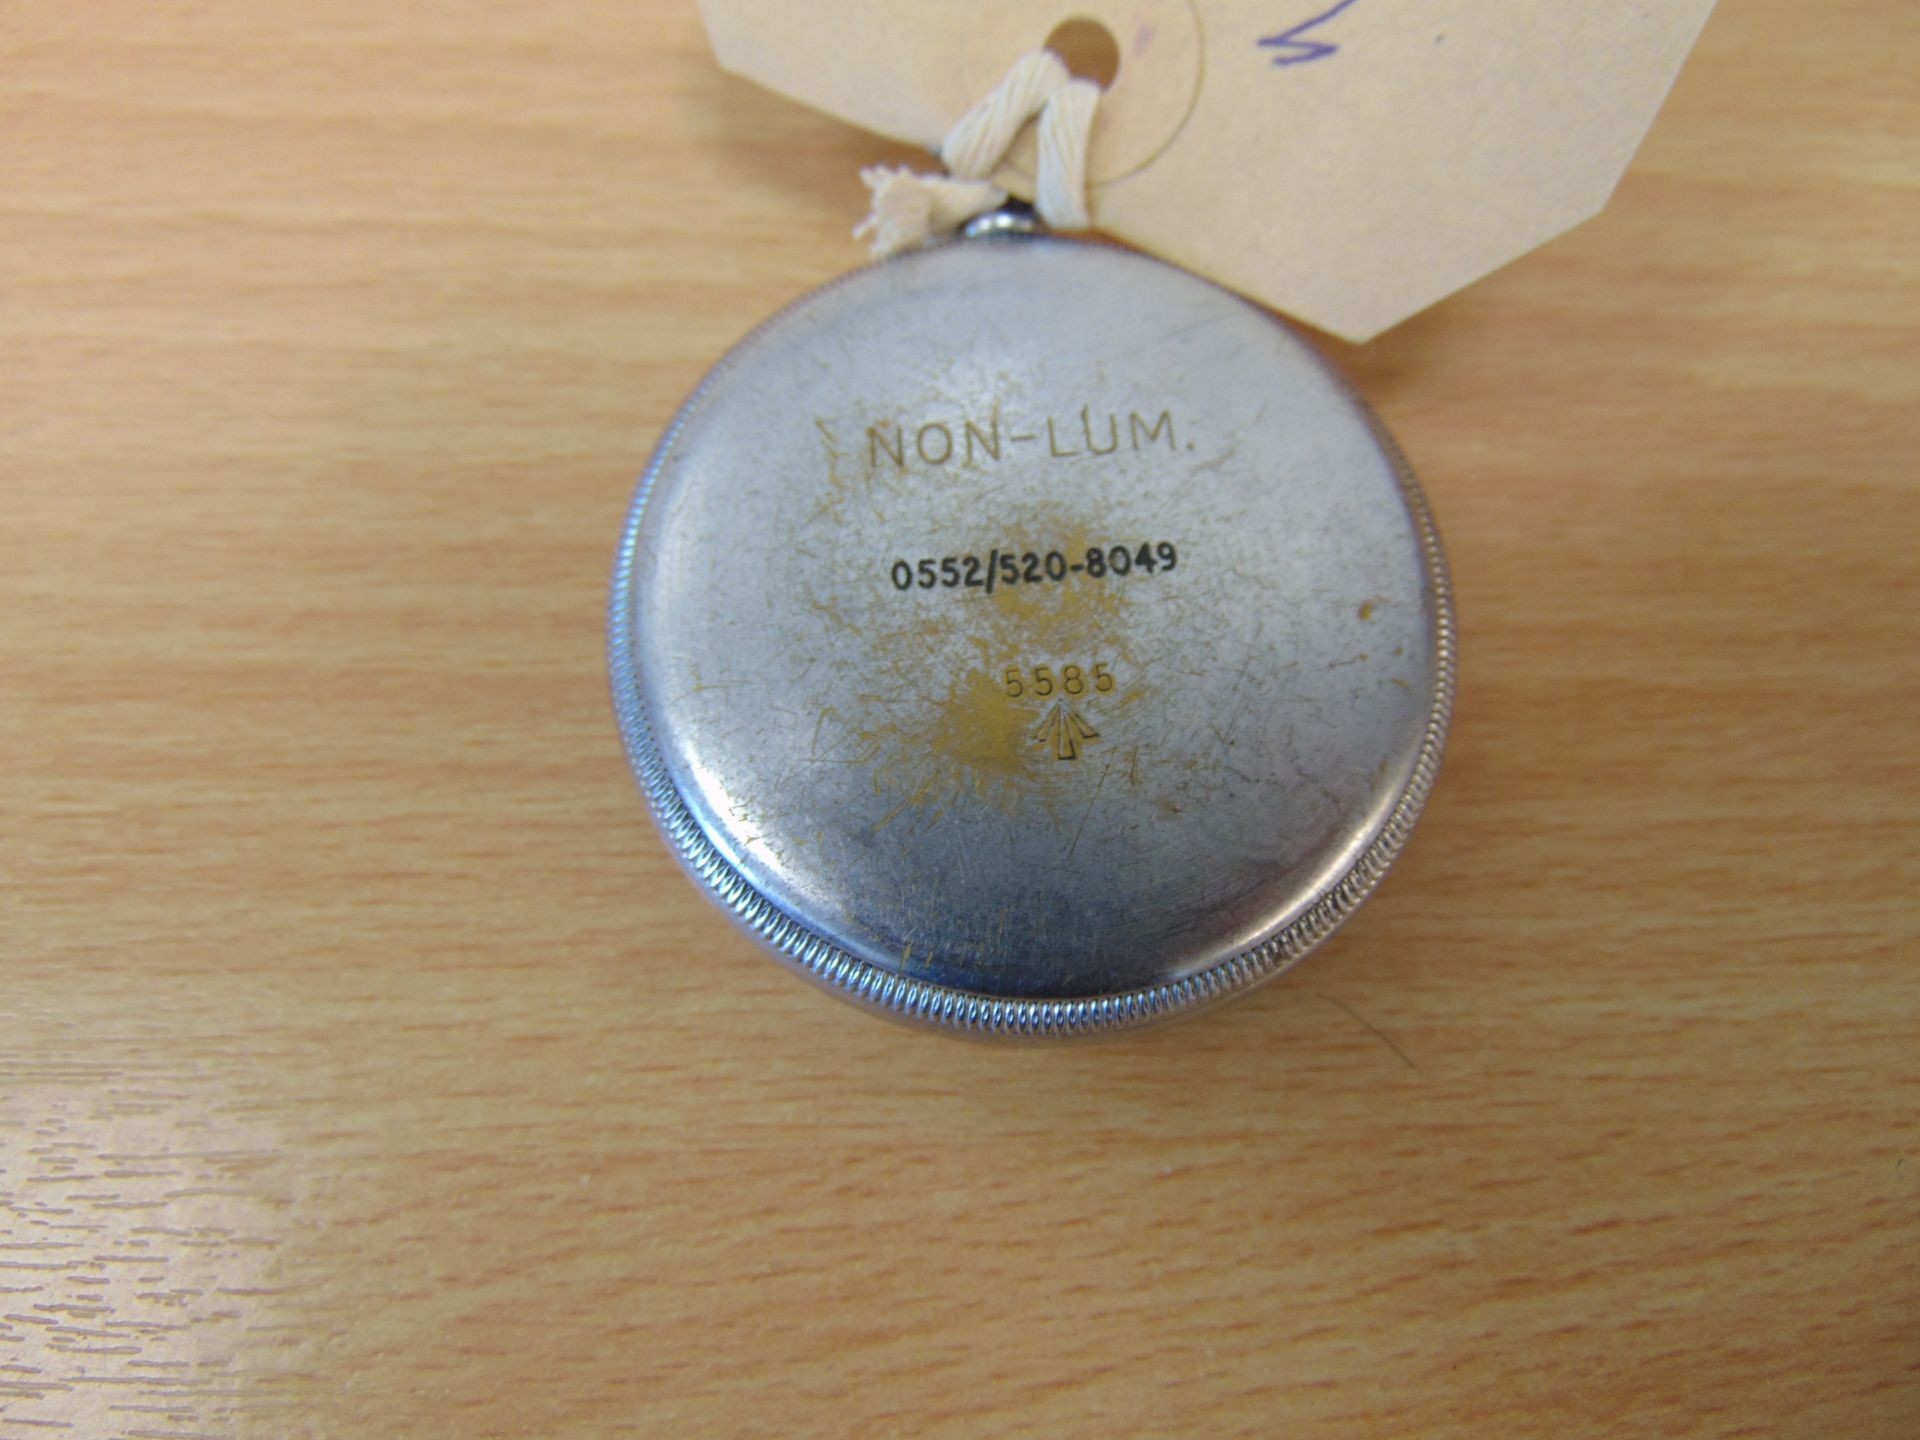 Unusual Waltham 0552 Royal Navy Deck Watch NON-LUM as issued to Nuclear Submarines - Image 3 of 5